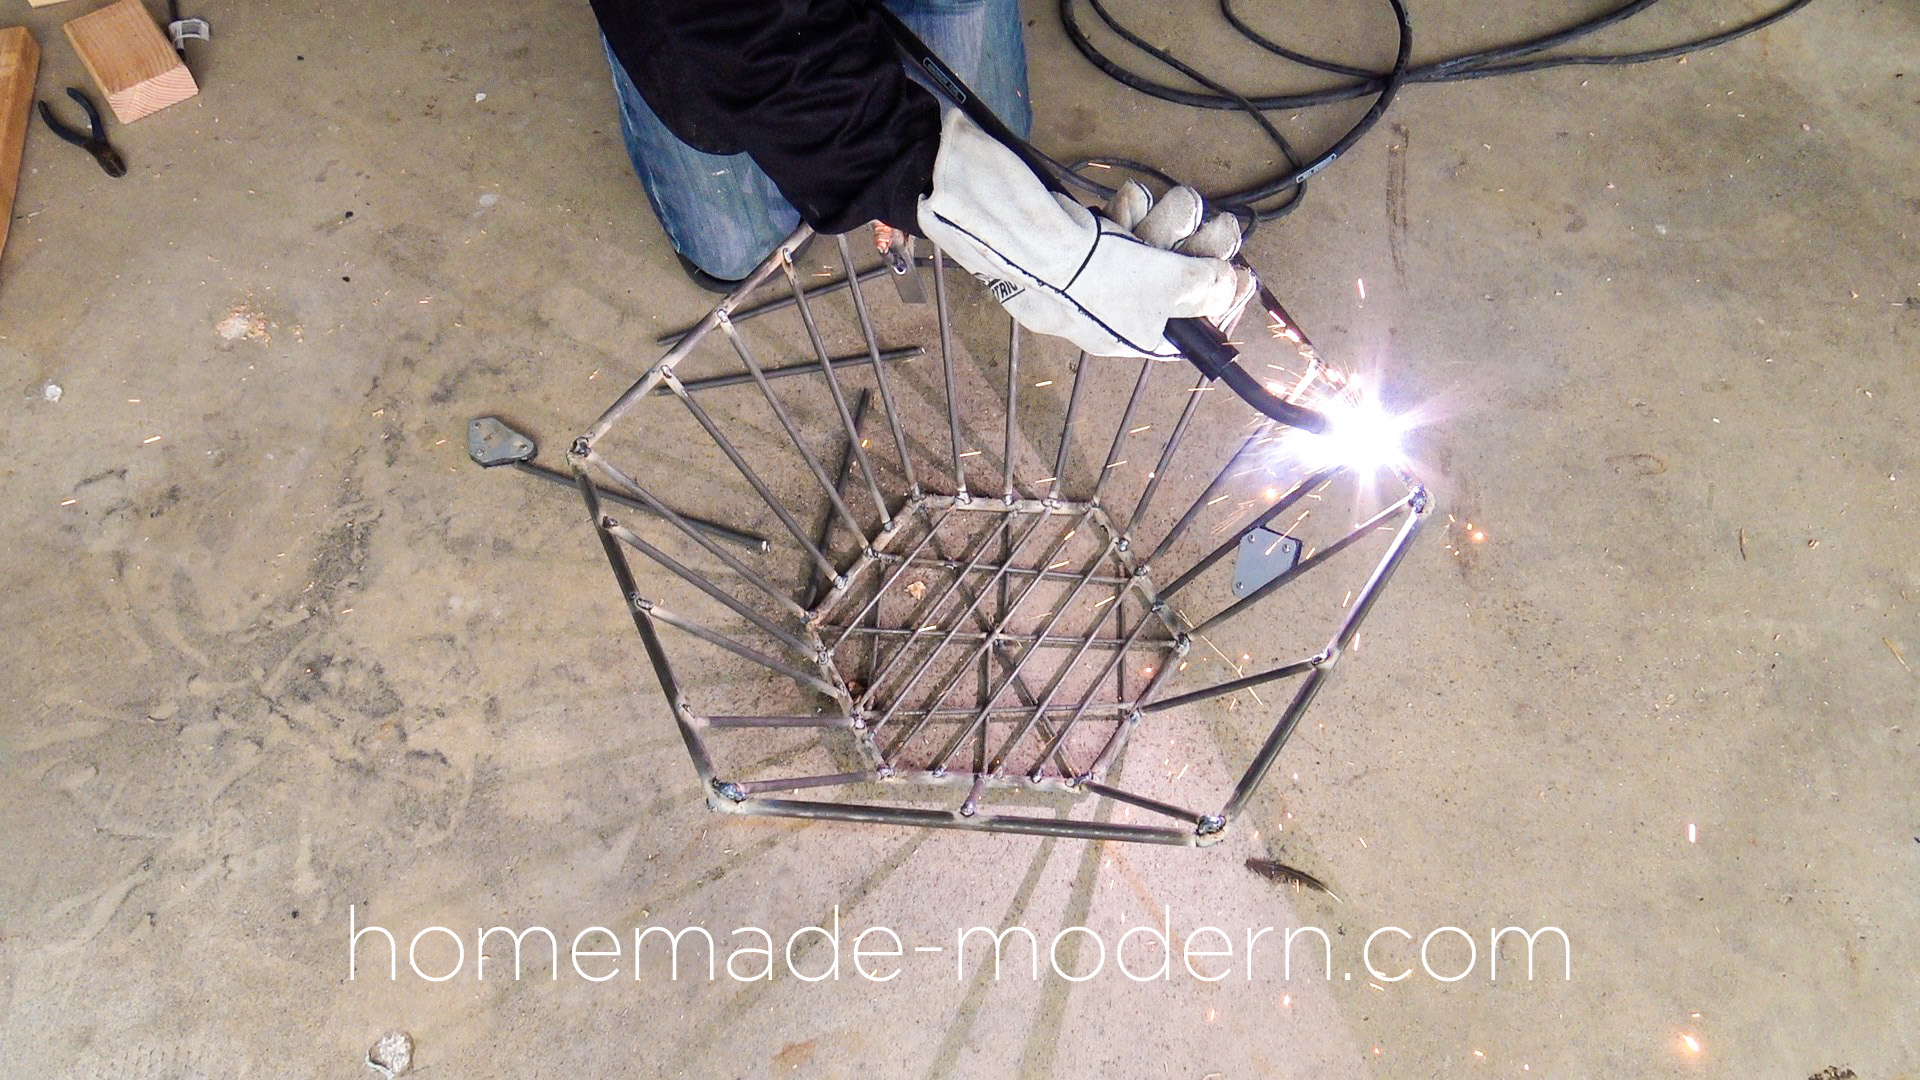 This DIY modern steel fire pit designed by Ben Uyeda is made out of steel rods from Home Depot that are welded together. For more information go to HomeMade-Modern.com